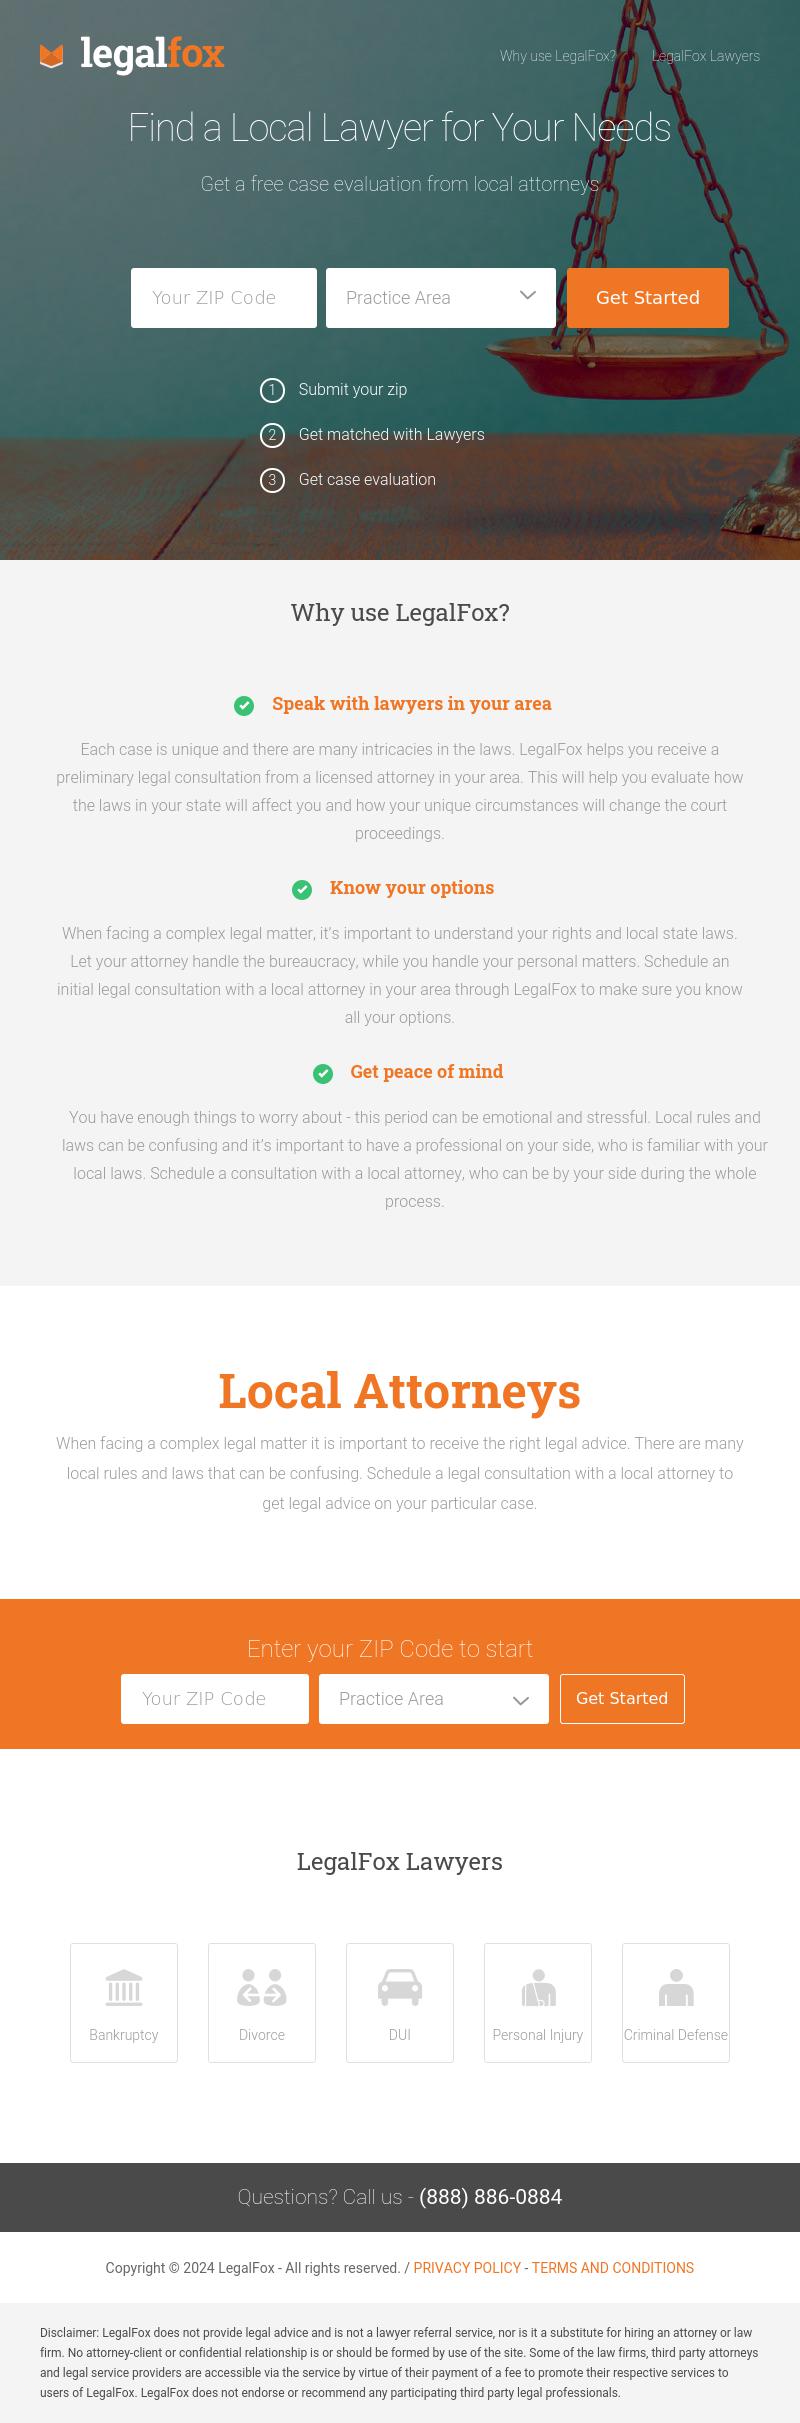 Find a Local Attorney - Kansas City MO Lawyers